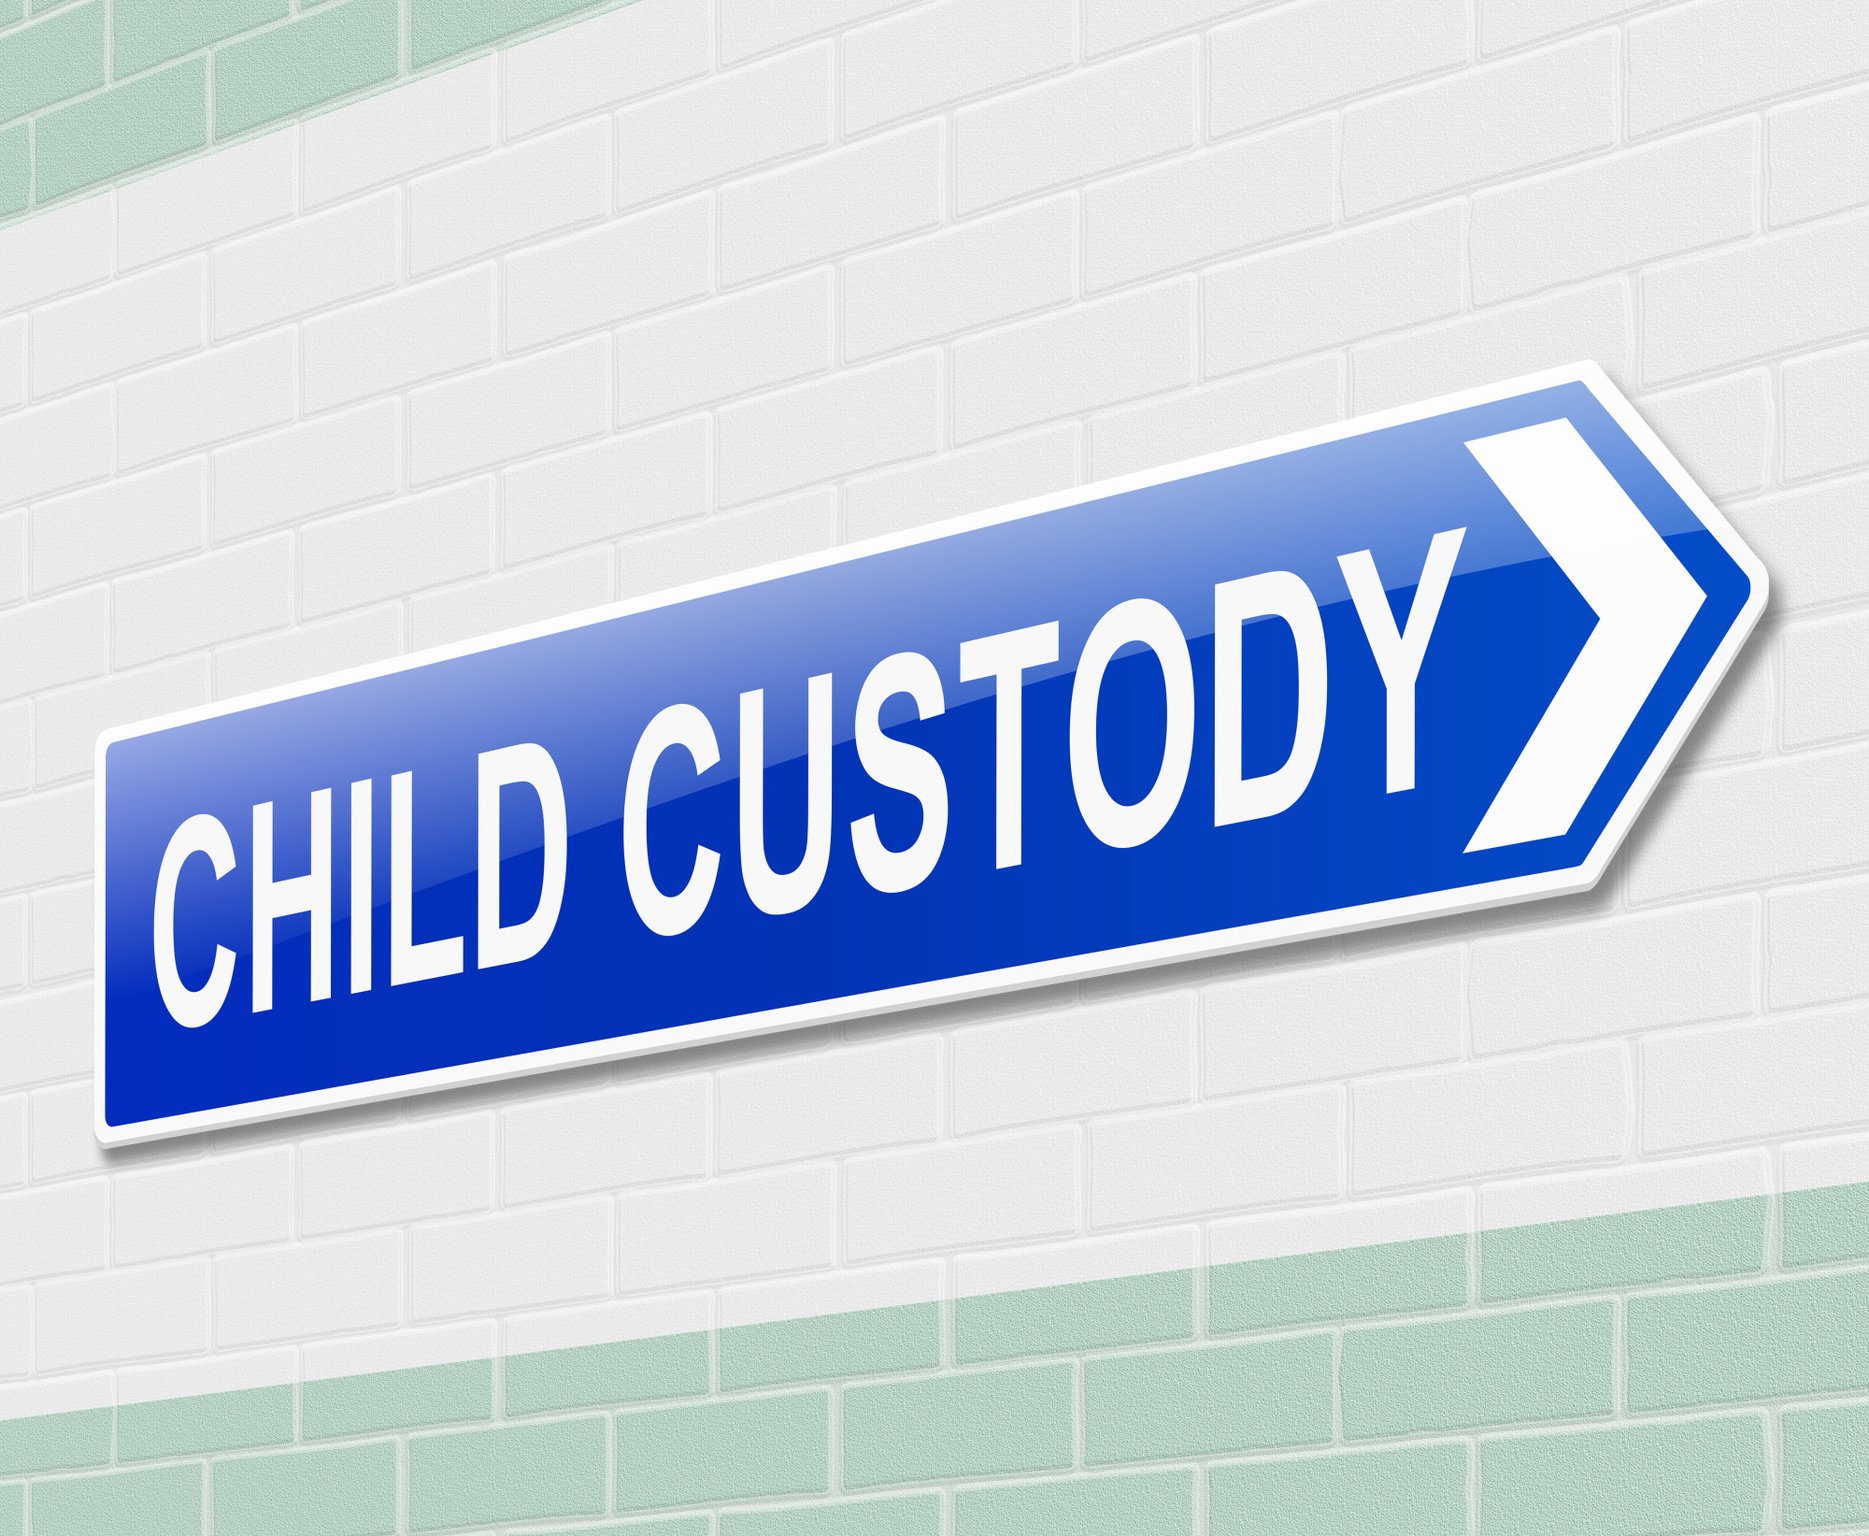 How to Give Up Custody of a Child